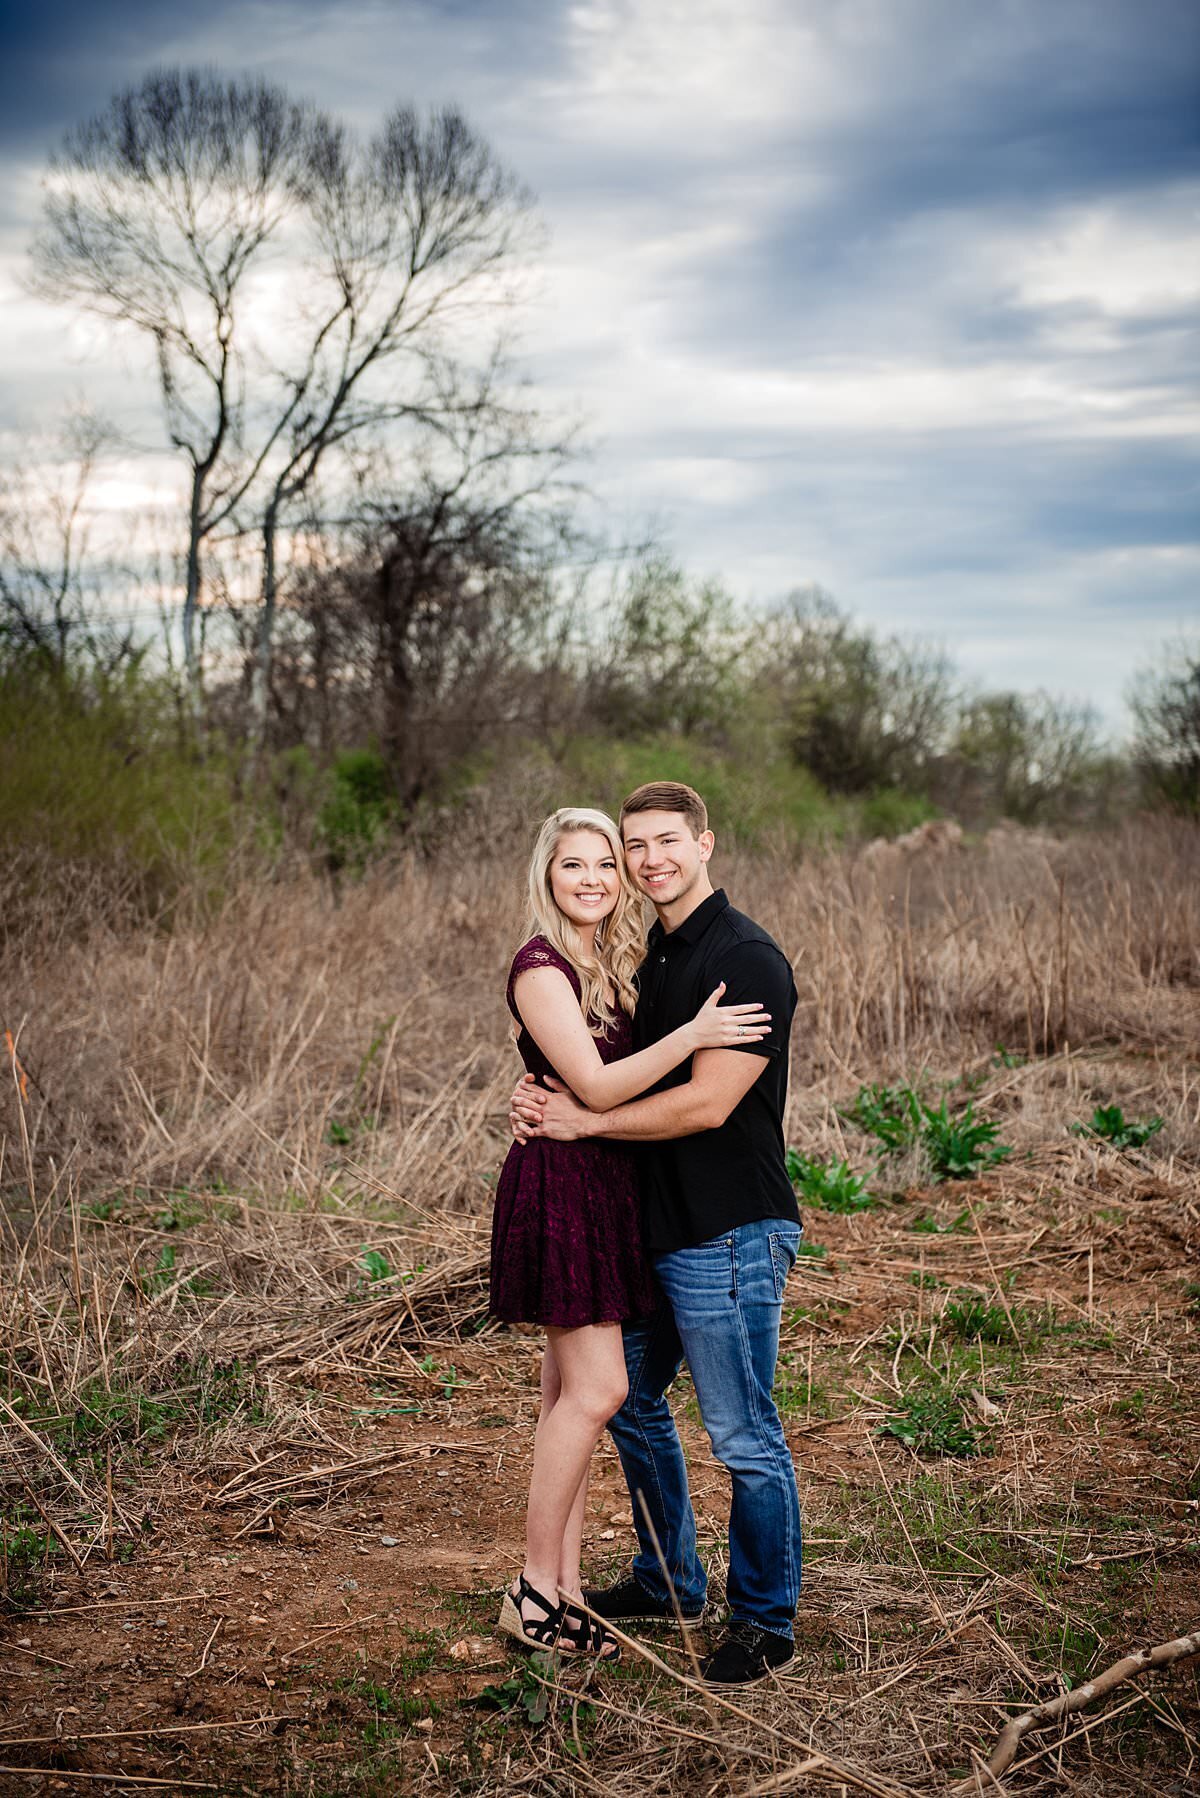 Couple standing together in the woodlands area of the Murfreesboro greenway, smiling at camera during sunset for their engagement photos